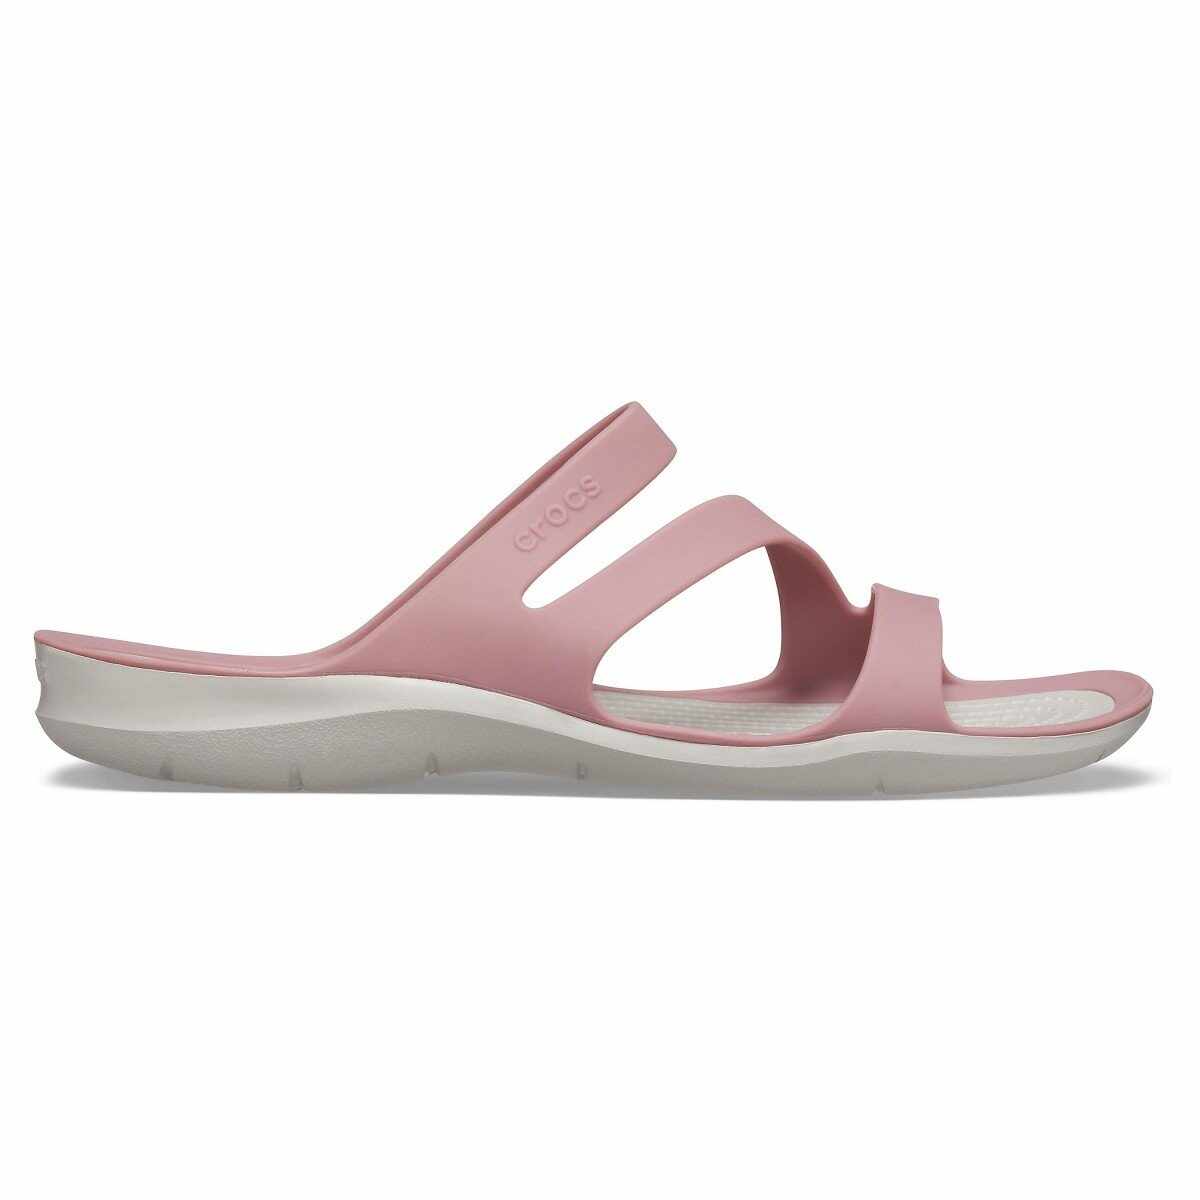 Papuci Crocs Swiftwater Sandal W Roz - Cassis/Pearl White